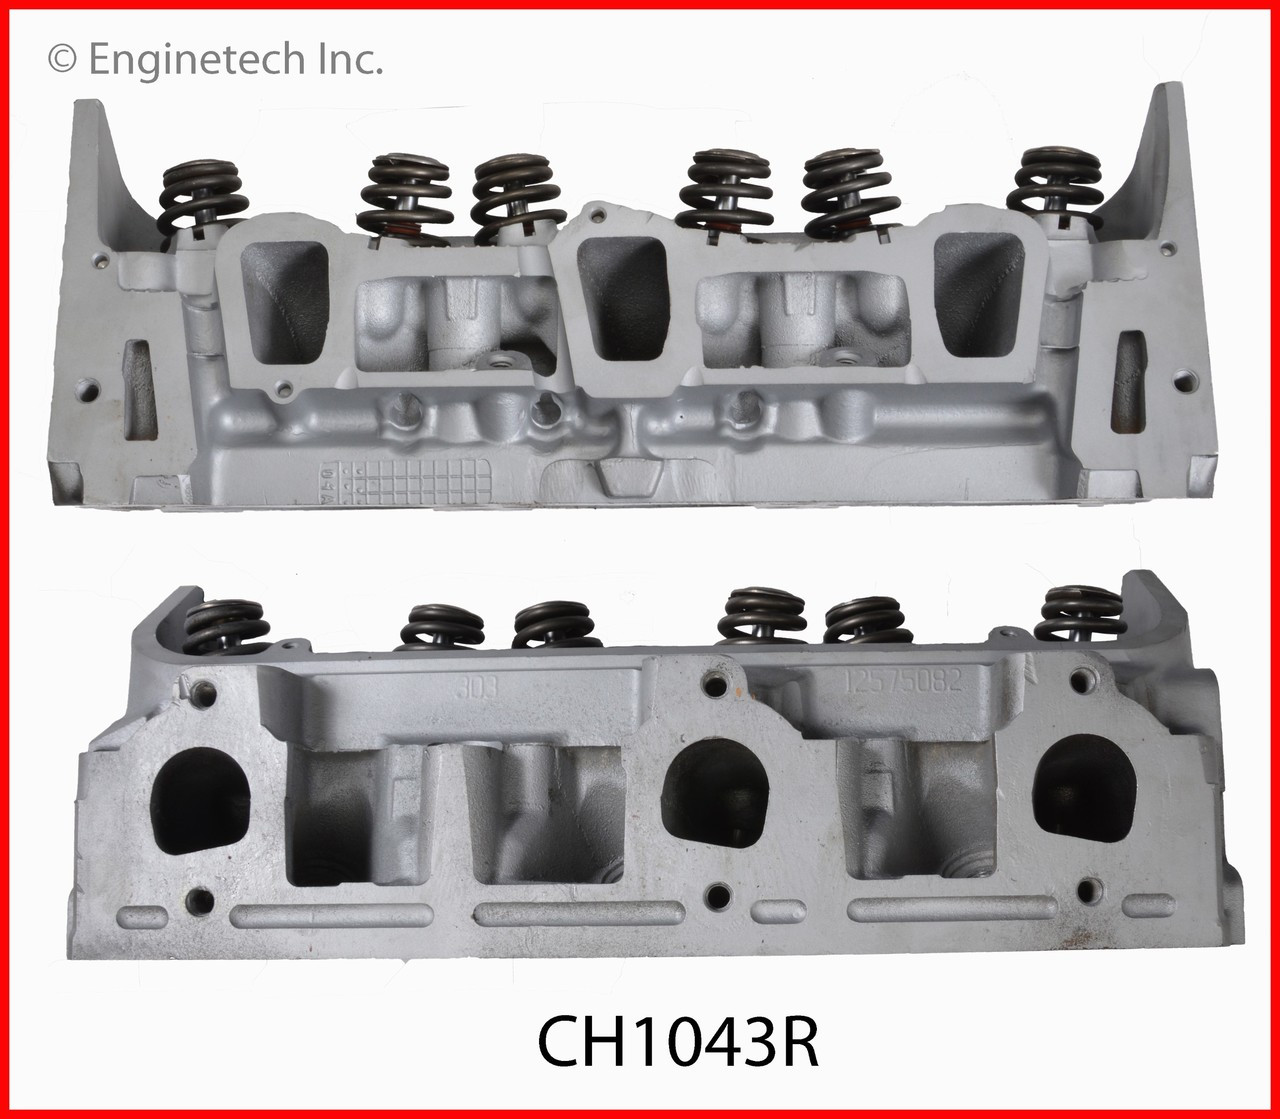 2008 Chevrolet Equinox 3.4L Engine Cylinder Head Assembly CH1043R -10